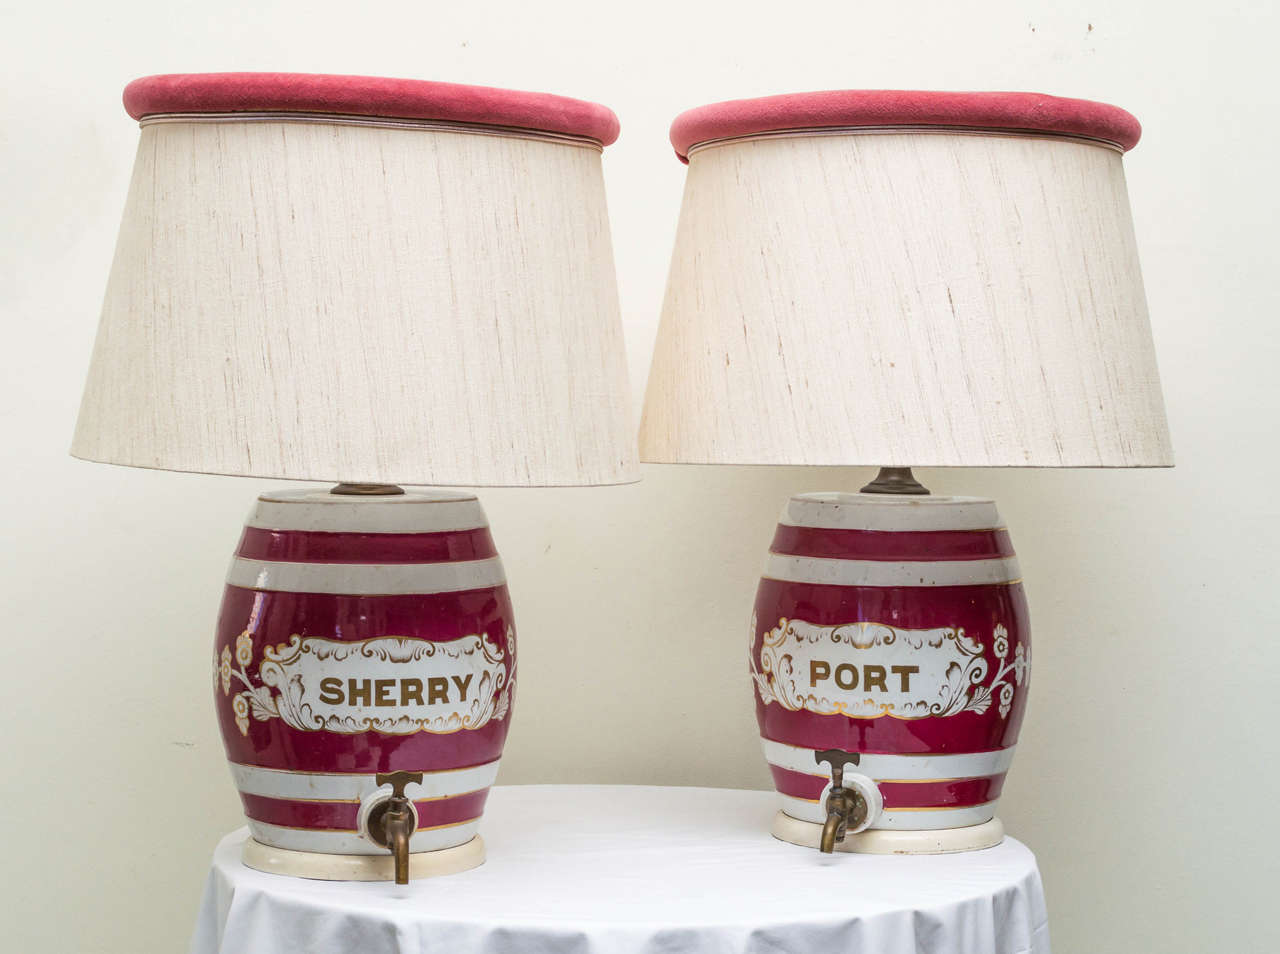 Pair of matched ceramic English port and sherry crocks as custom lamps. Complete with old brass taps. Three way switches with light diffuser shades. Good antique patina. With wood bases and linen shades. Ceramic crocks are 13 inches high.